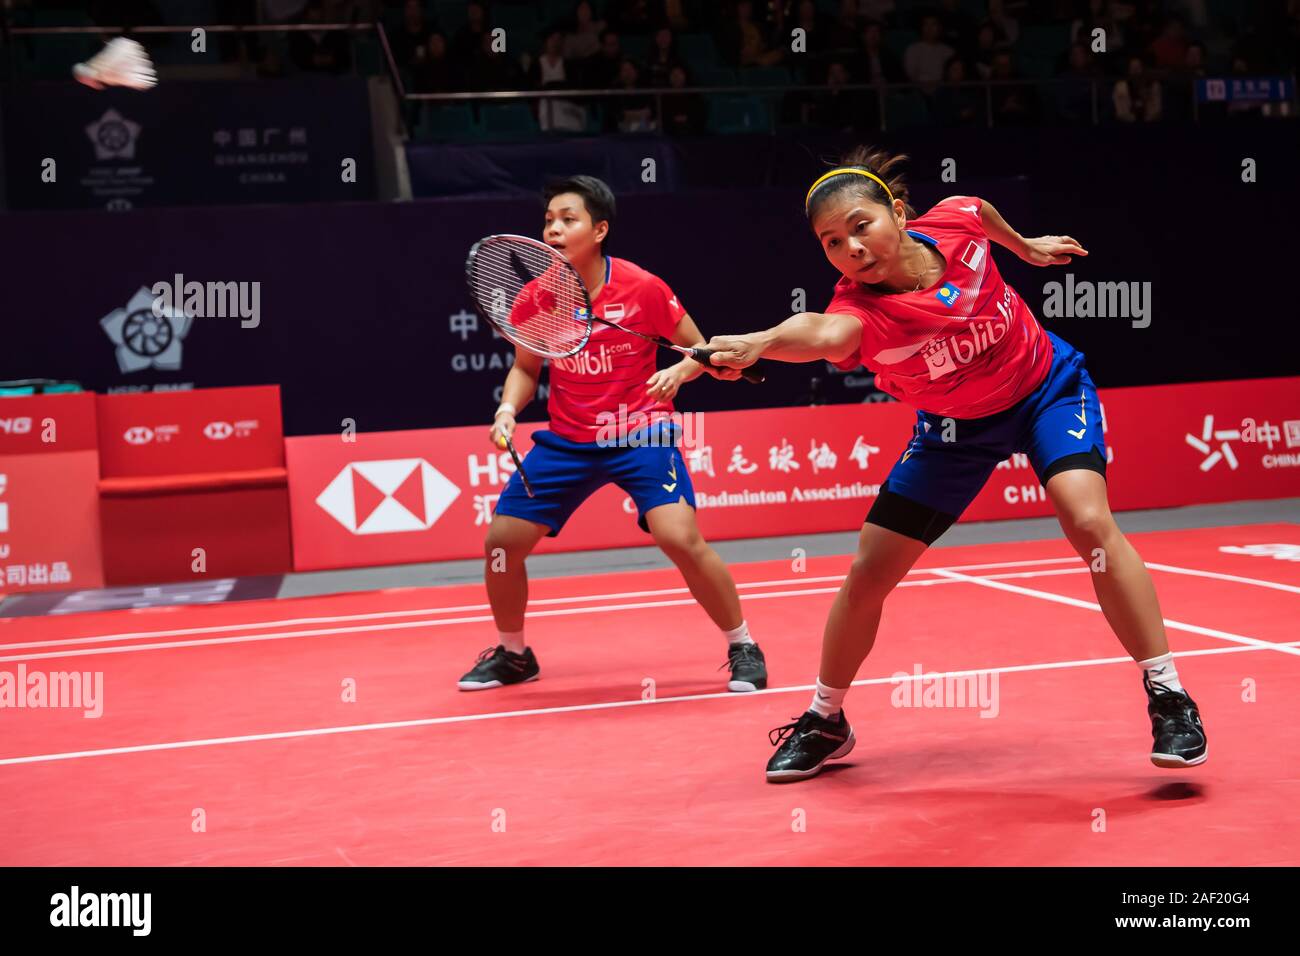 Indonesian professional badminton players Greysia Polii and Apriyani Rahayu  compete against Japanese professional badminton players Yuki Fukushima and  Sayaka Hirota at the group stage of women's doubles at HSBC BWF World Tour